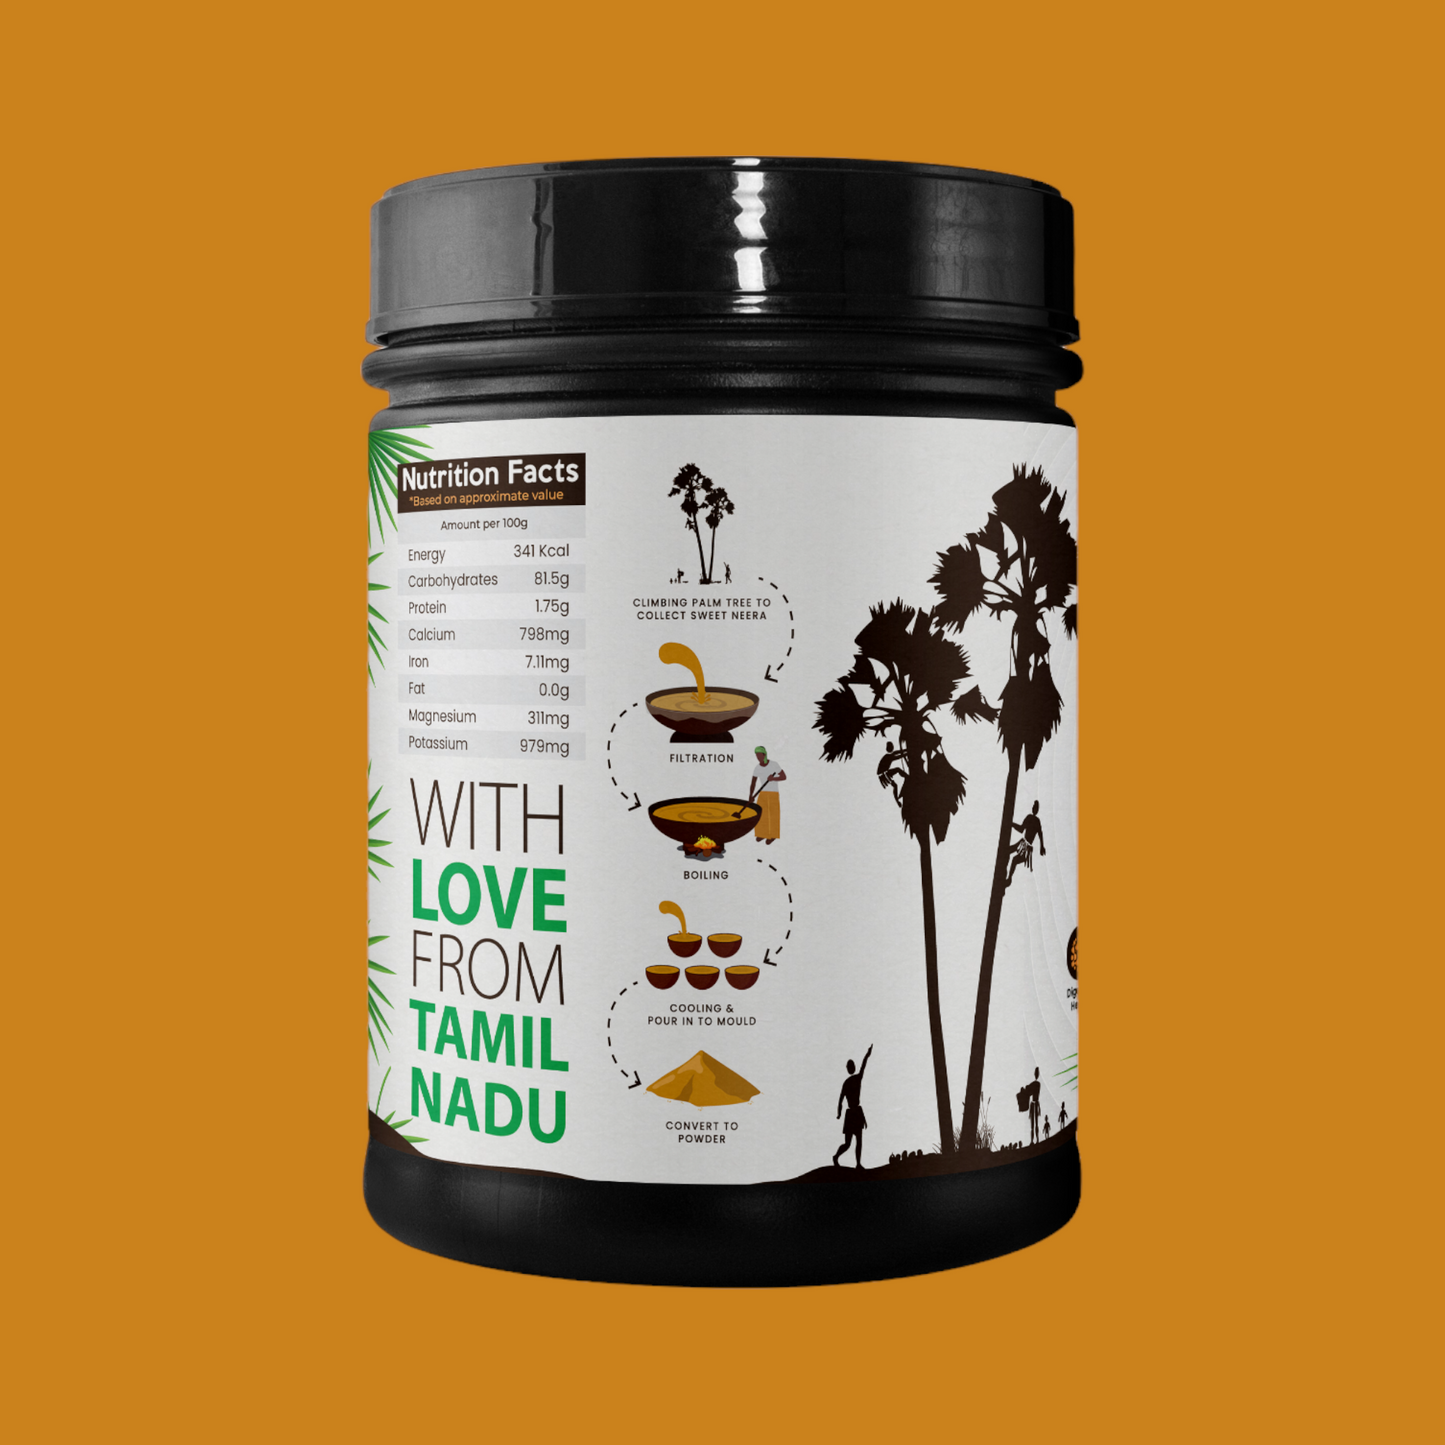 Palm Jaggery Powder Jar - Your 100% Natural Sweetener Solution